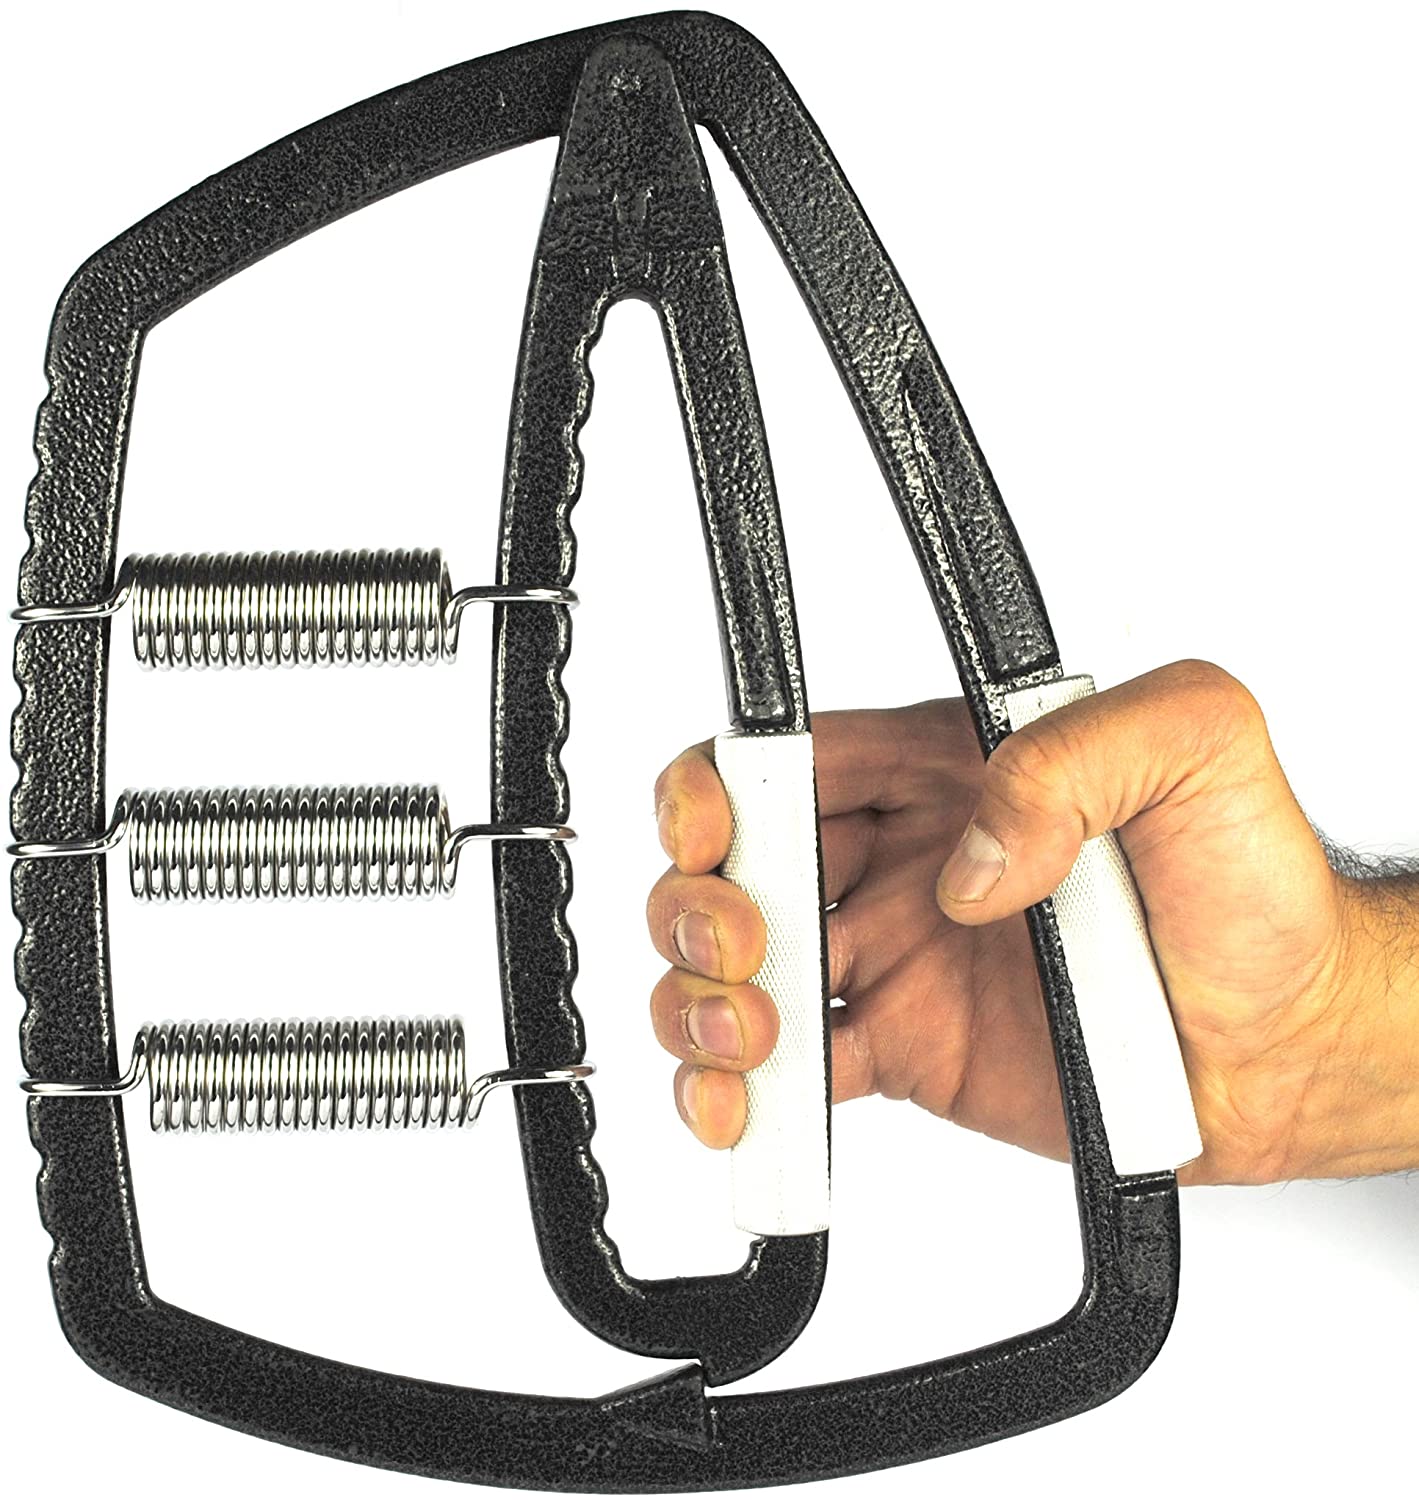 Hand Grip Strengthener With 3 Springs